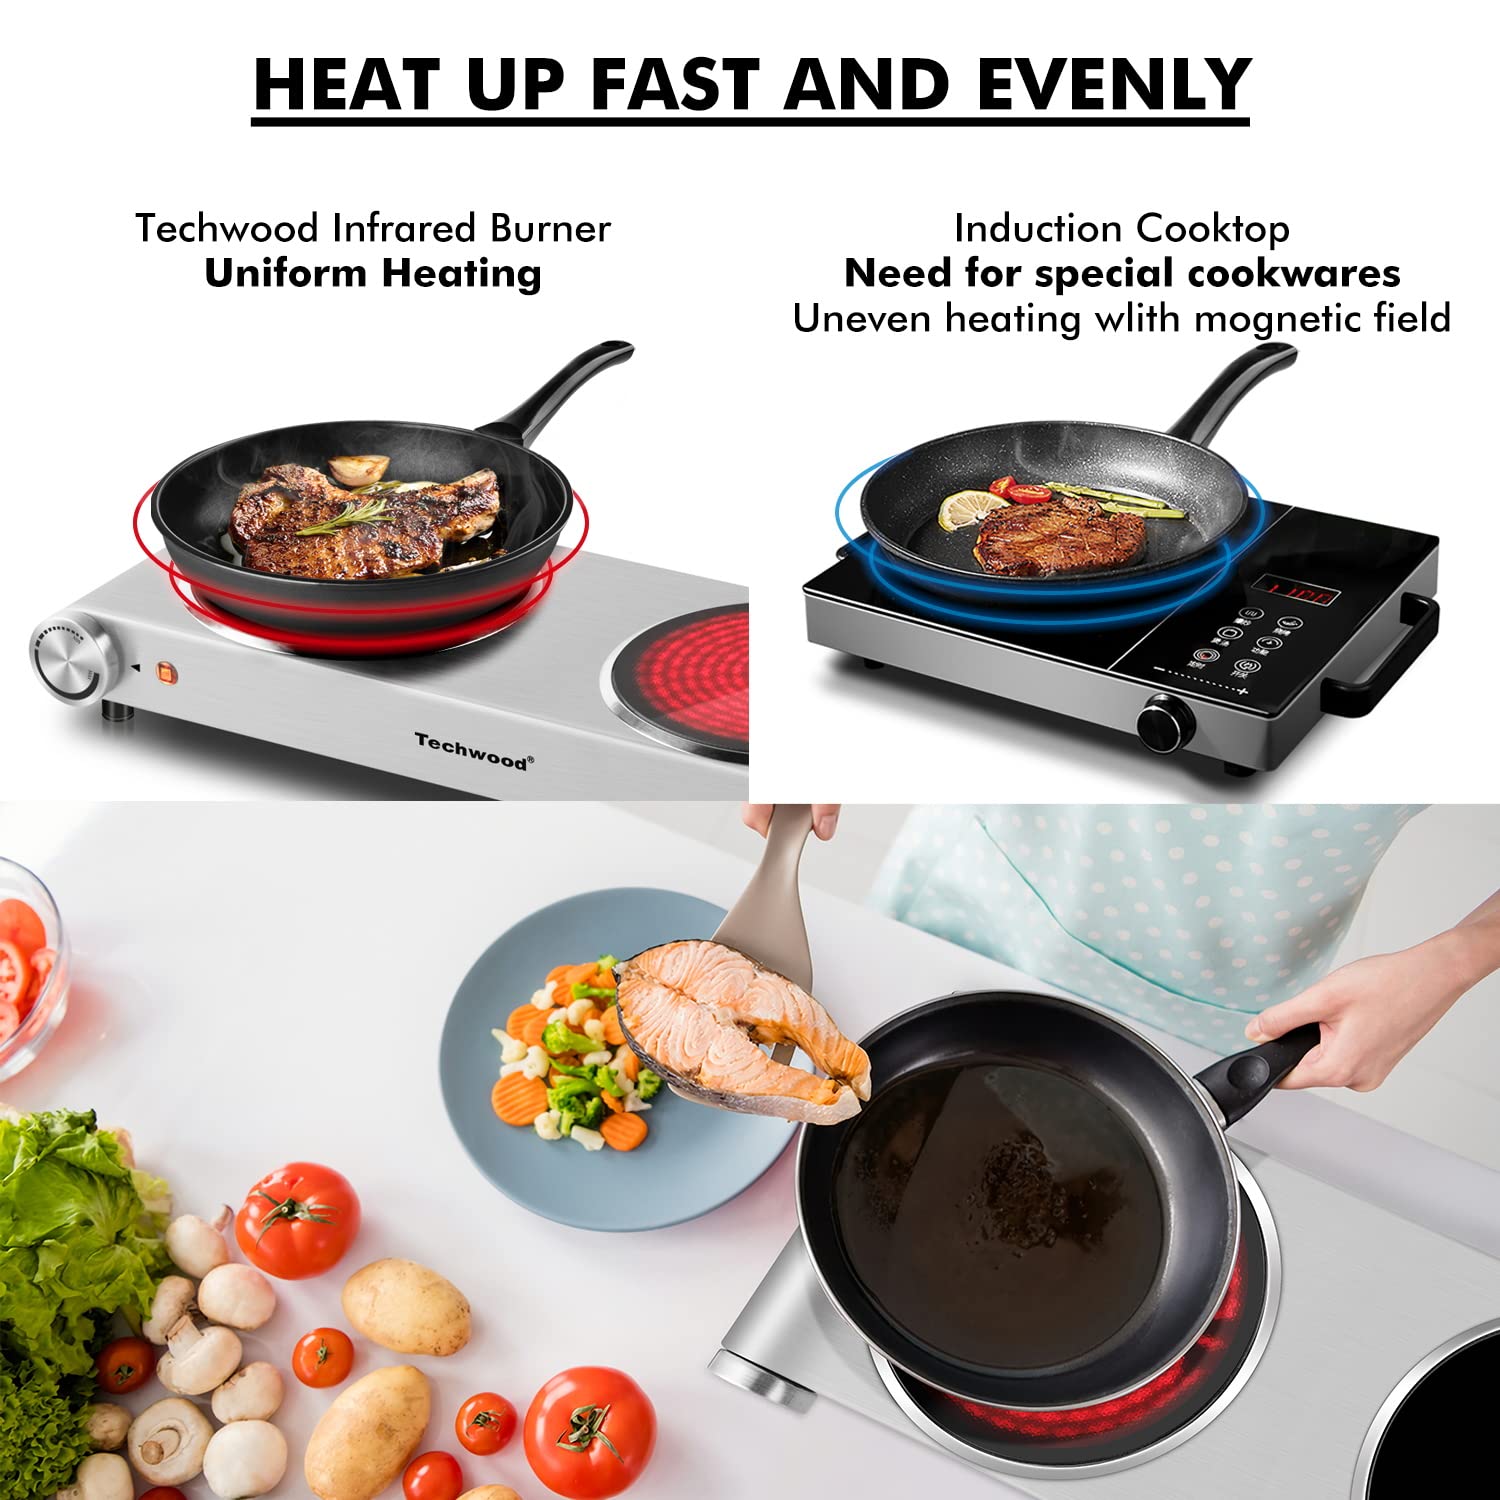 Cusimax 900W+900W Double Hot Plate, Portable Electric Double Burner  Cooktop, Cast Iron Hot Plates for Cooking, Black Stainless Steel Countertop  Burner 